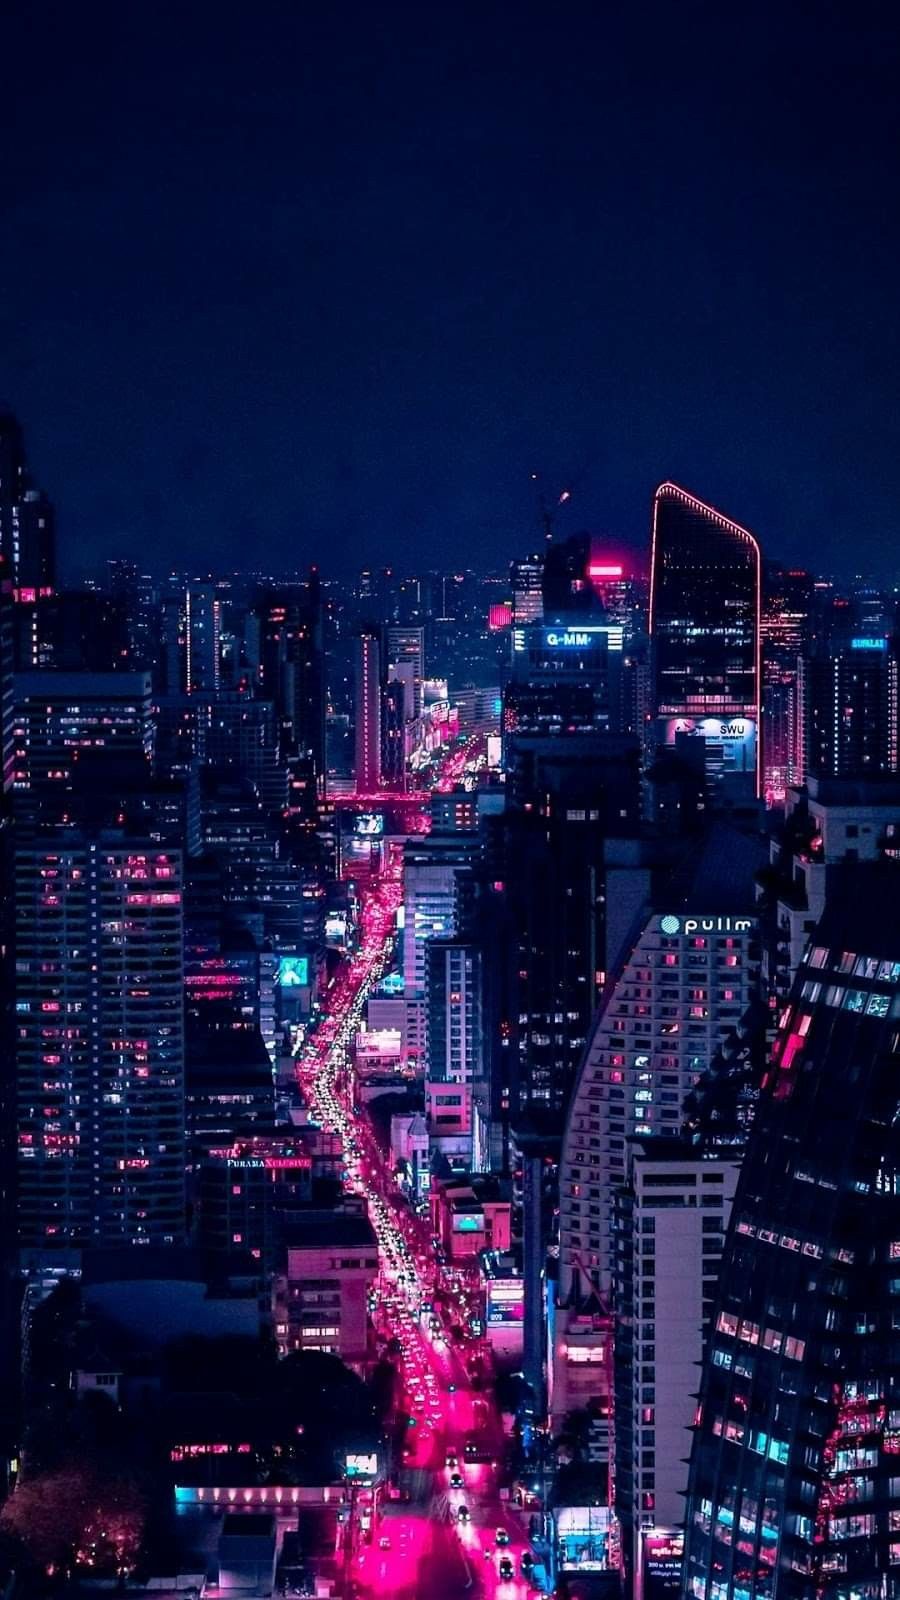 A city at night with bright lights and buildings - City